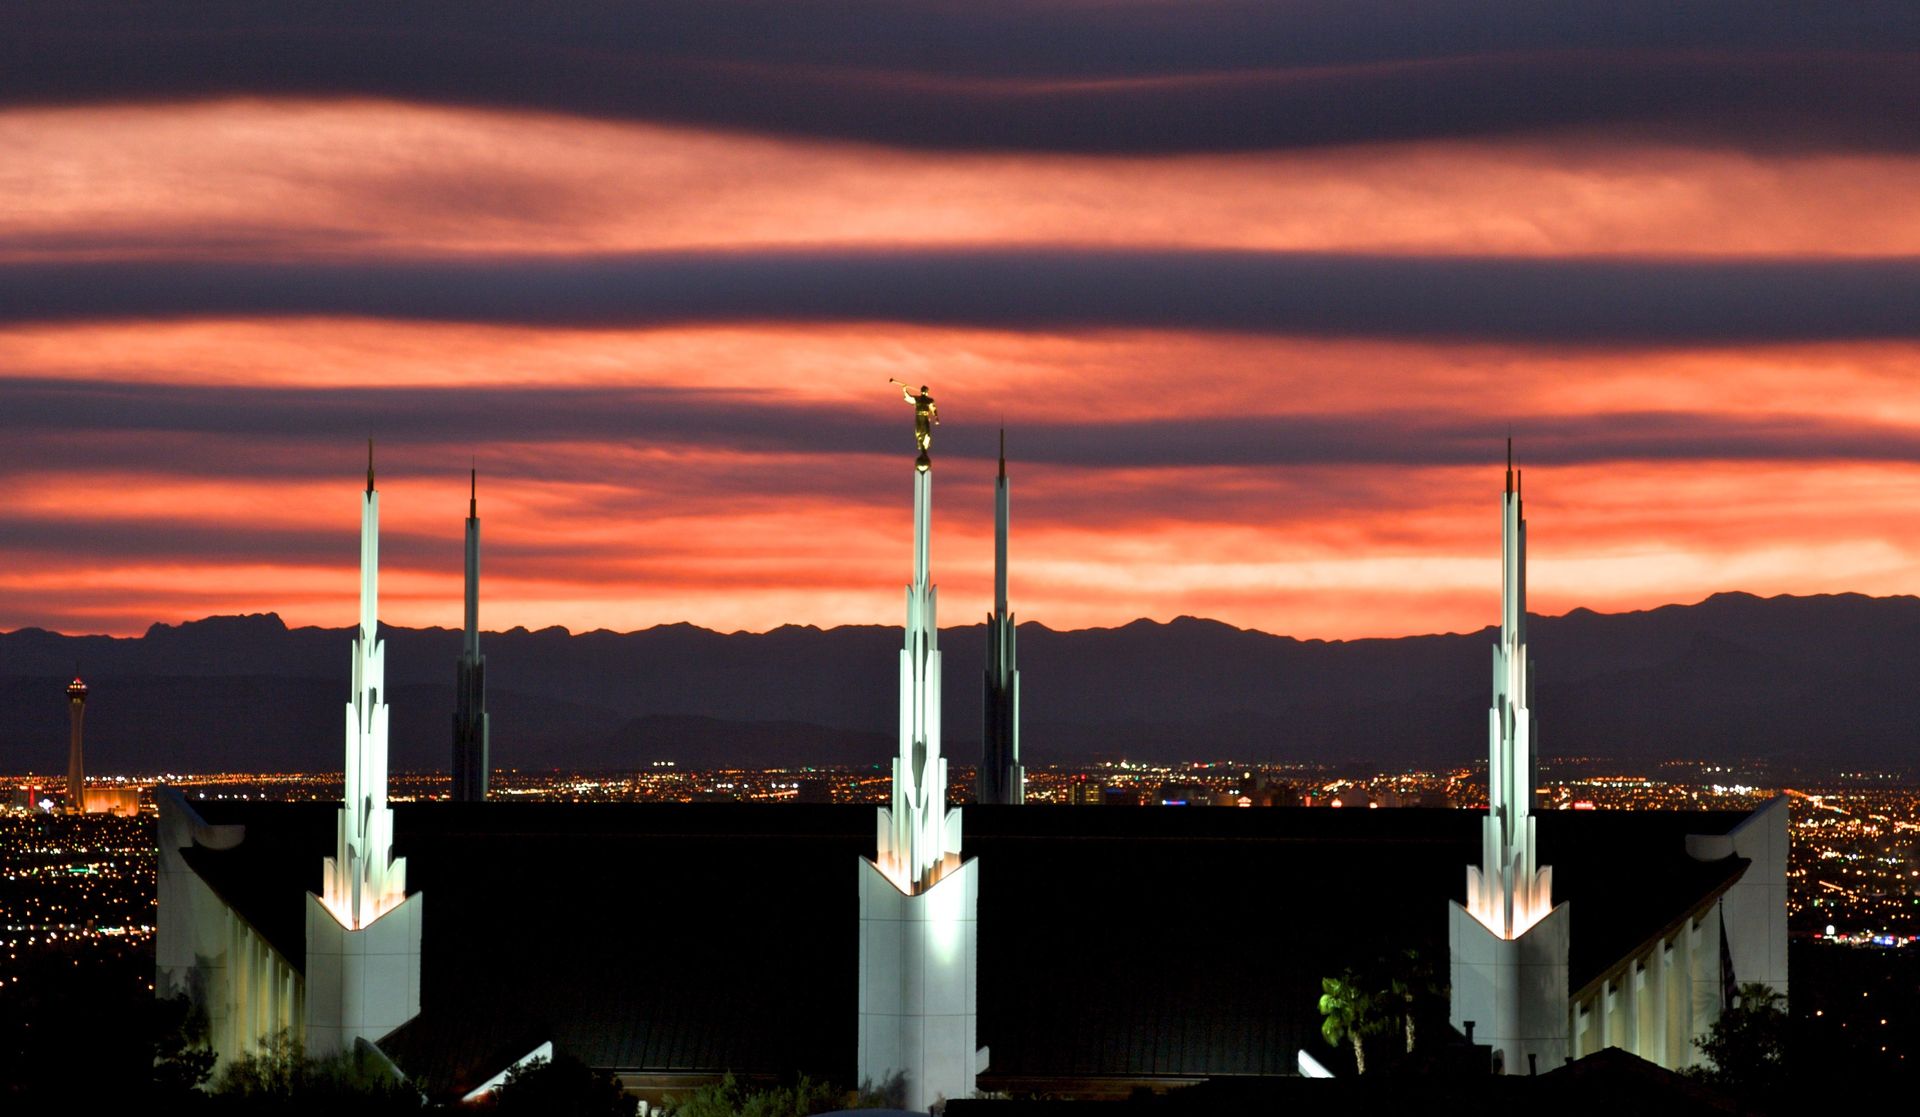 The Las Vegas Nevada Temple in the evening, including an illuminated sky and the spires of the temple.  